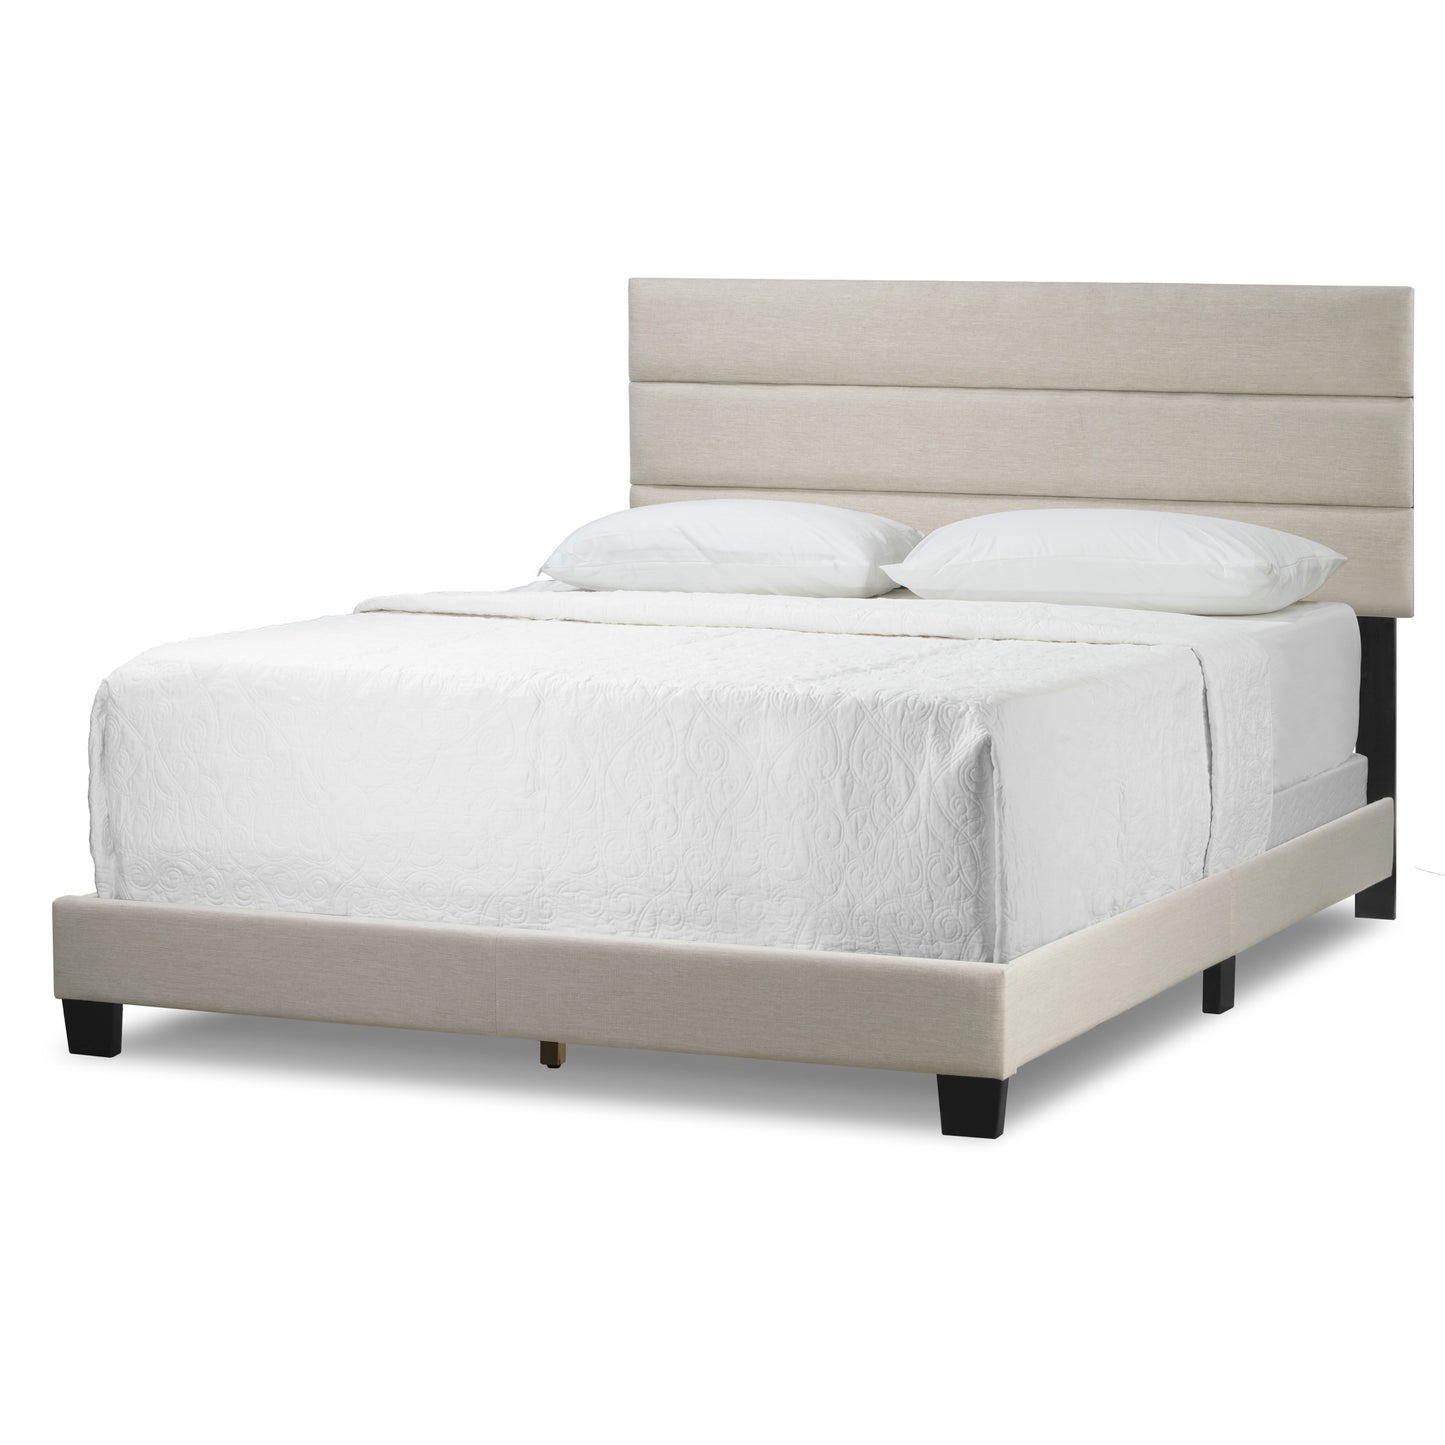 Aris Beige Fabric Twin Bed with Line Stitching Tufting